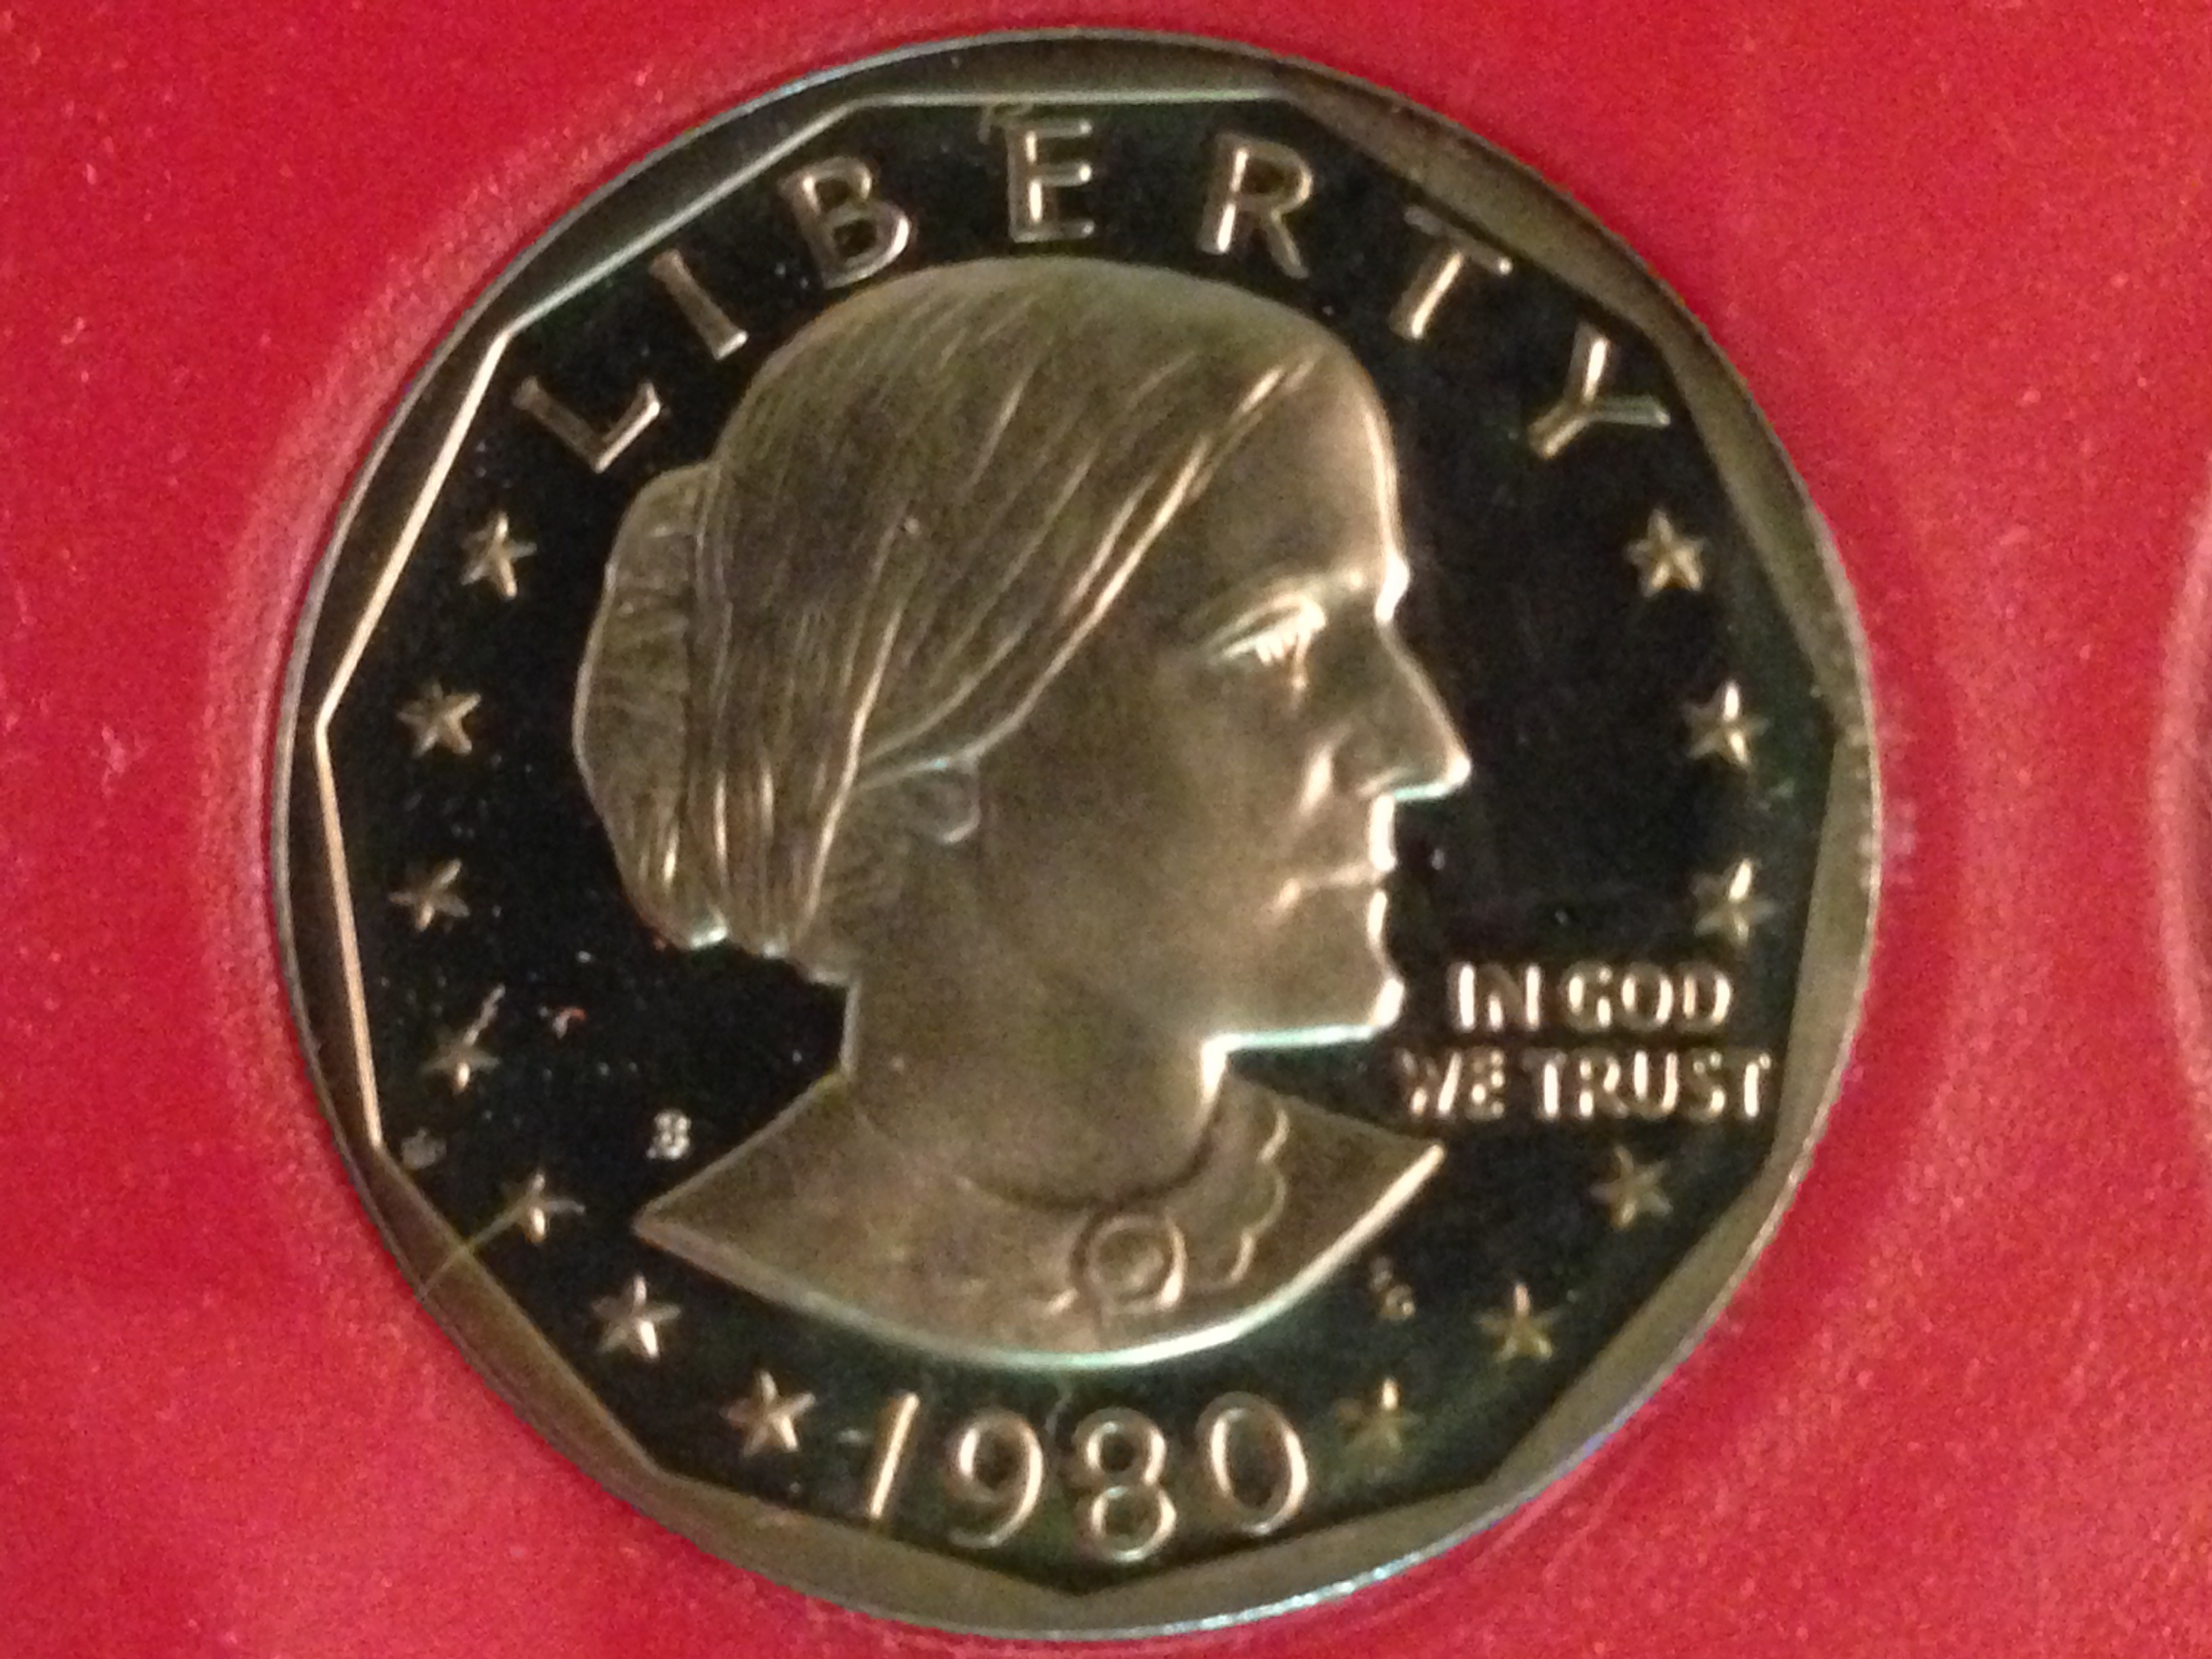 susan b anthony 1980 coin value